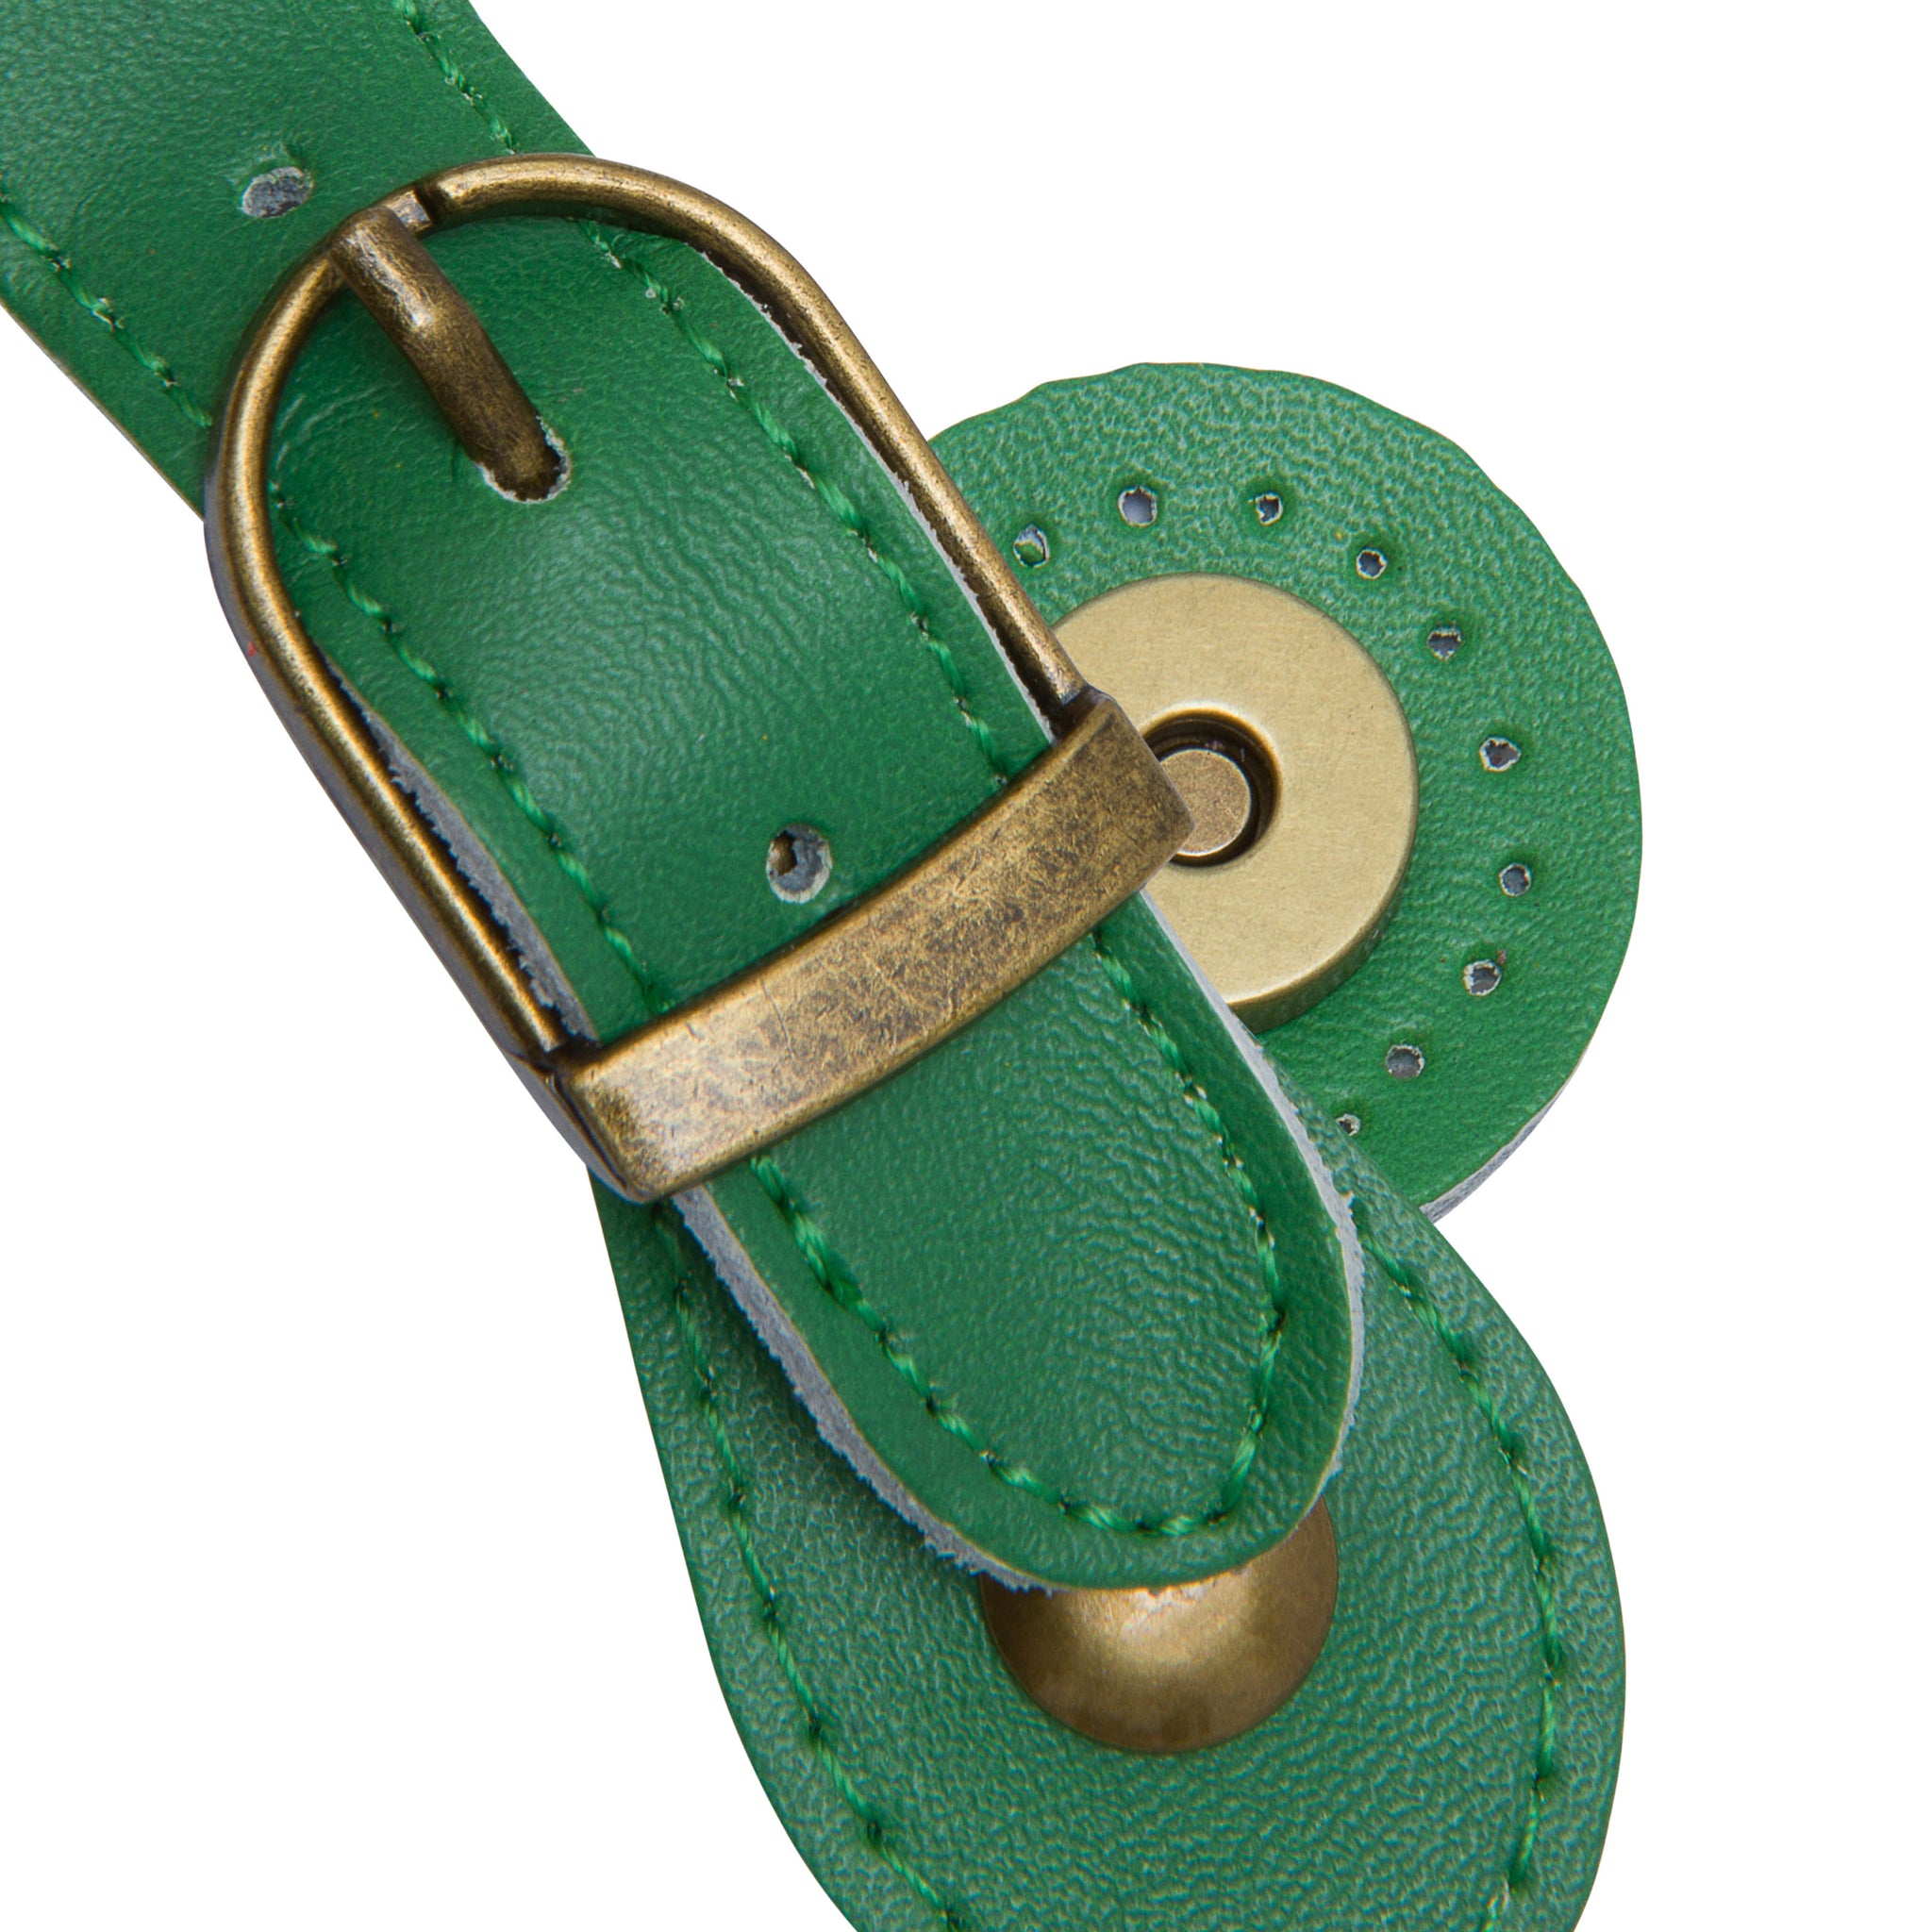 Makers' Mercantile Leather Sew-On Adjustable Buckle Closure